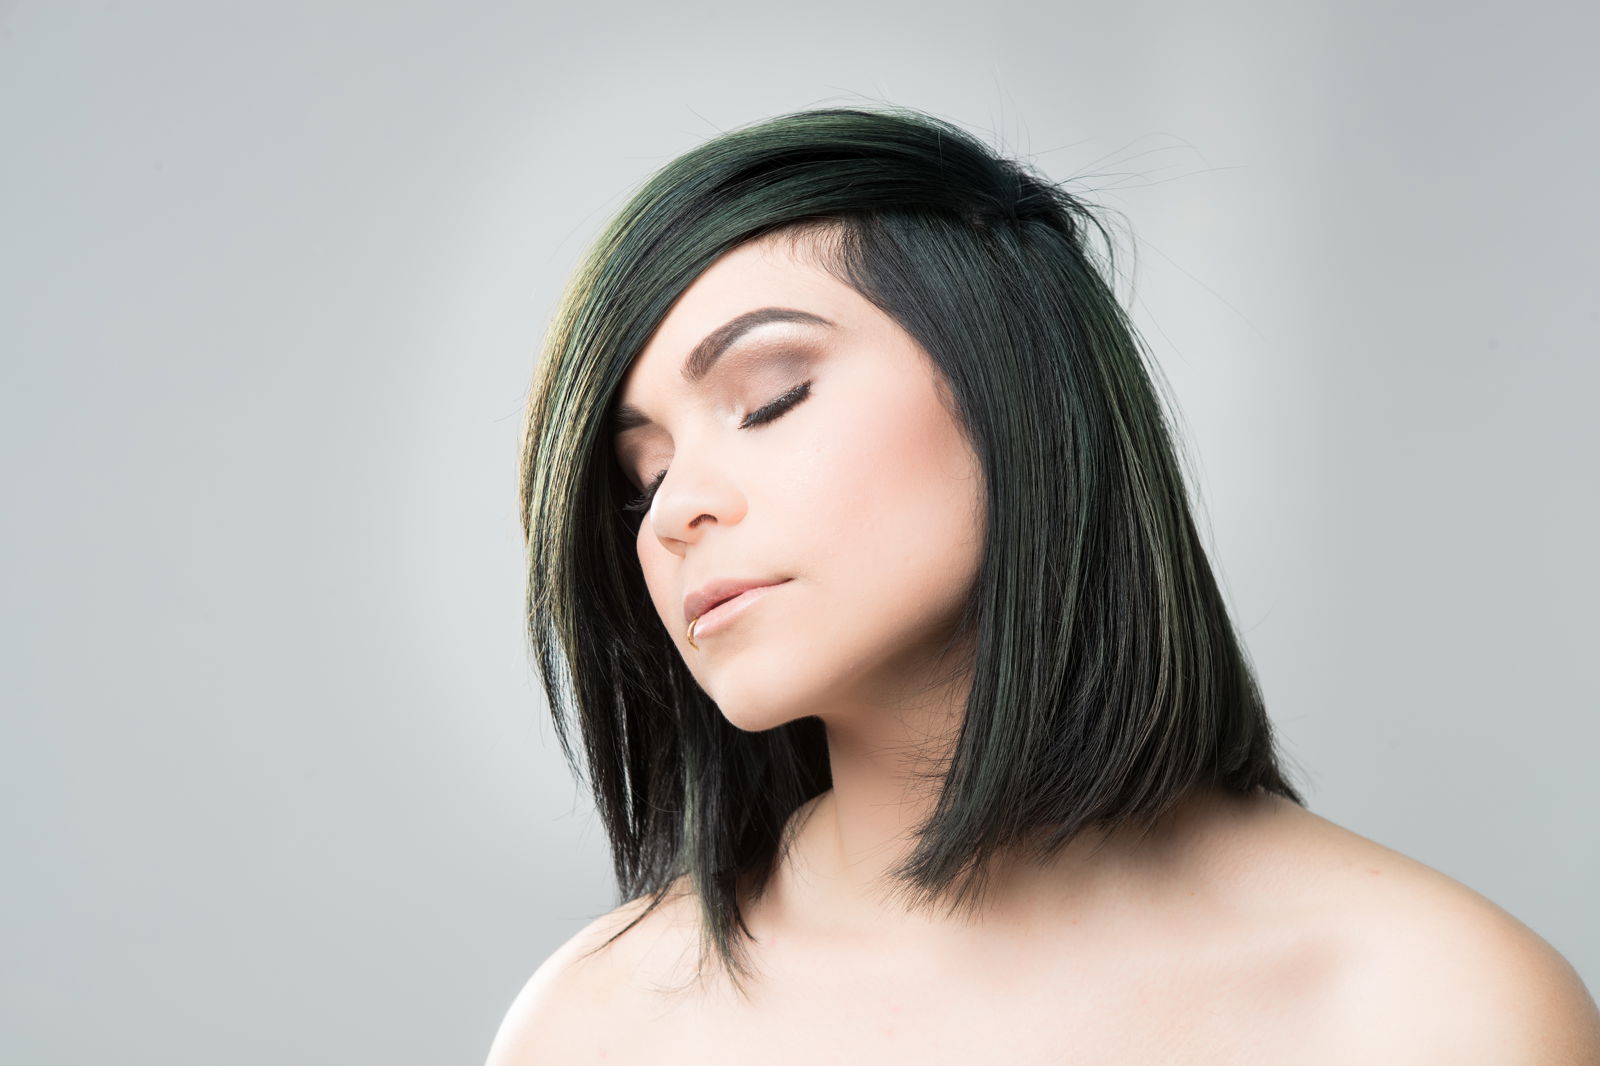 Model showing a shoulder-length bob with a dark forest-green color.